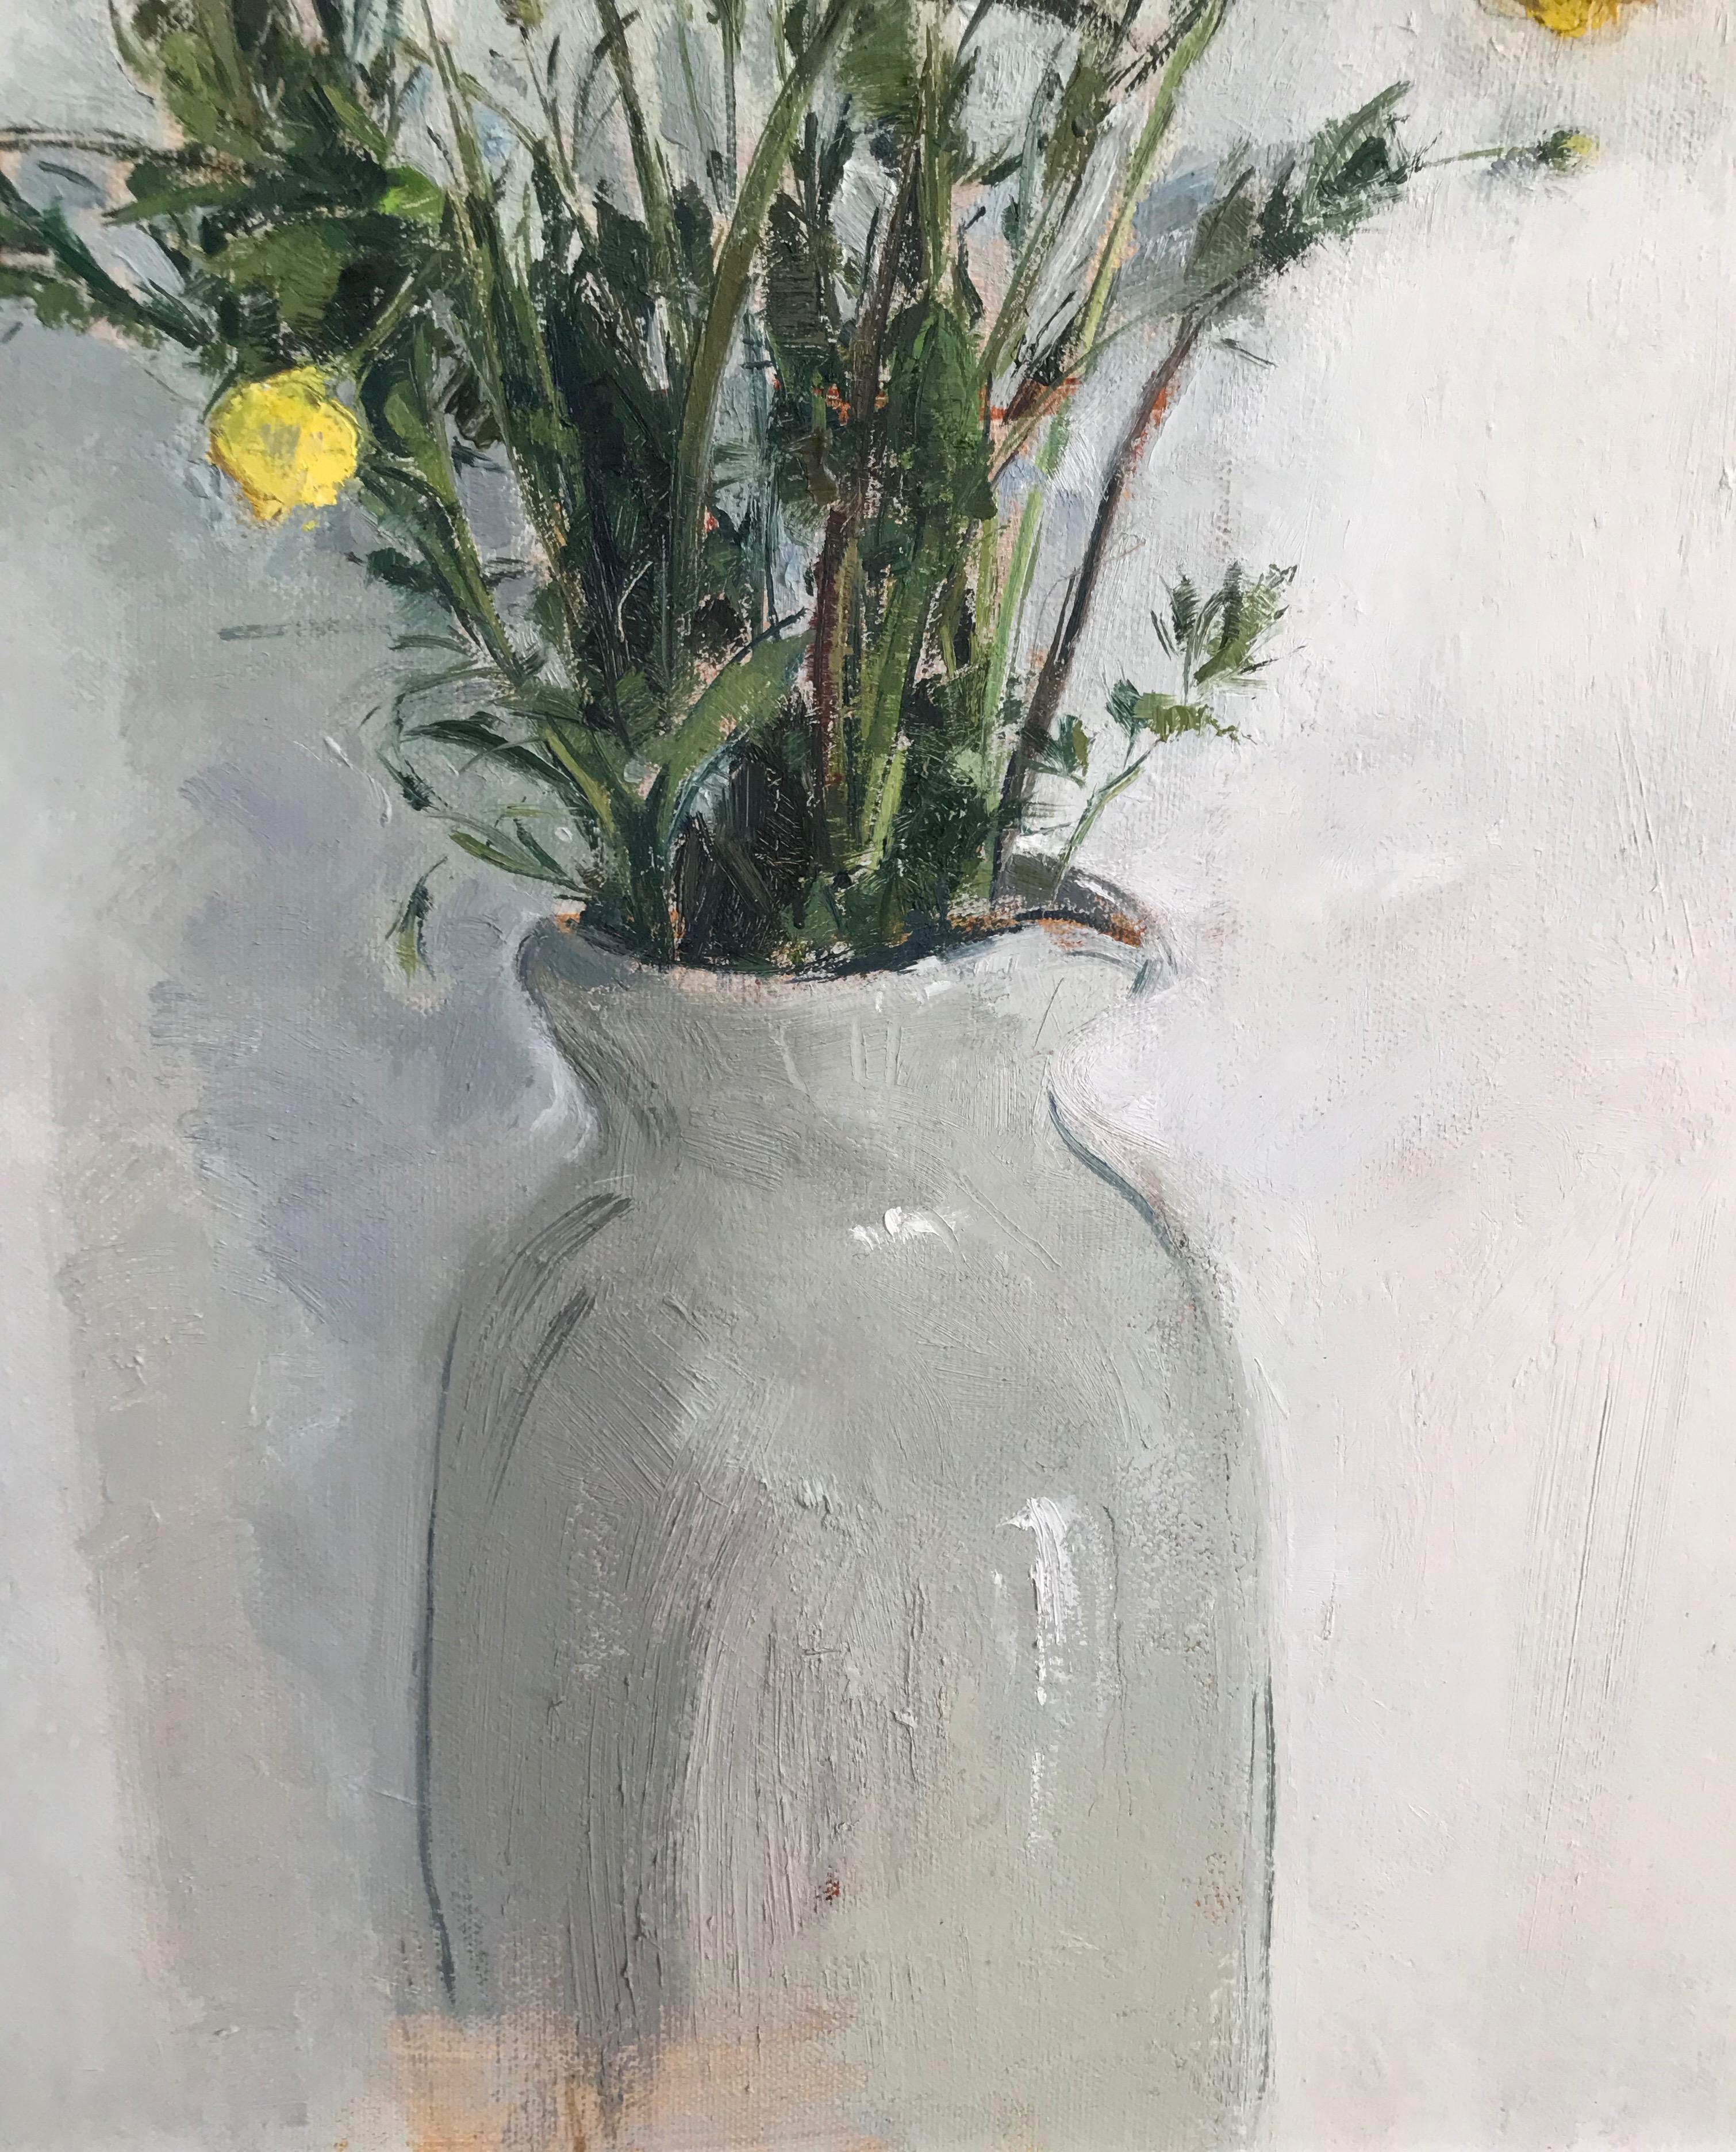 Adrian Parnell (b.1952)
Jug of flowers, 
Signed with initials,
Inscribed with title and date verso
Oil on canvas,
20 x 16 inches

A delicate and subtly captured study of summer flowers.

Adrian Parnell was born in London and studied at St Martin's